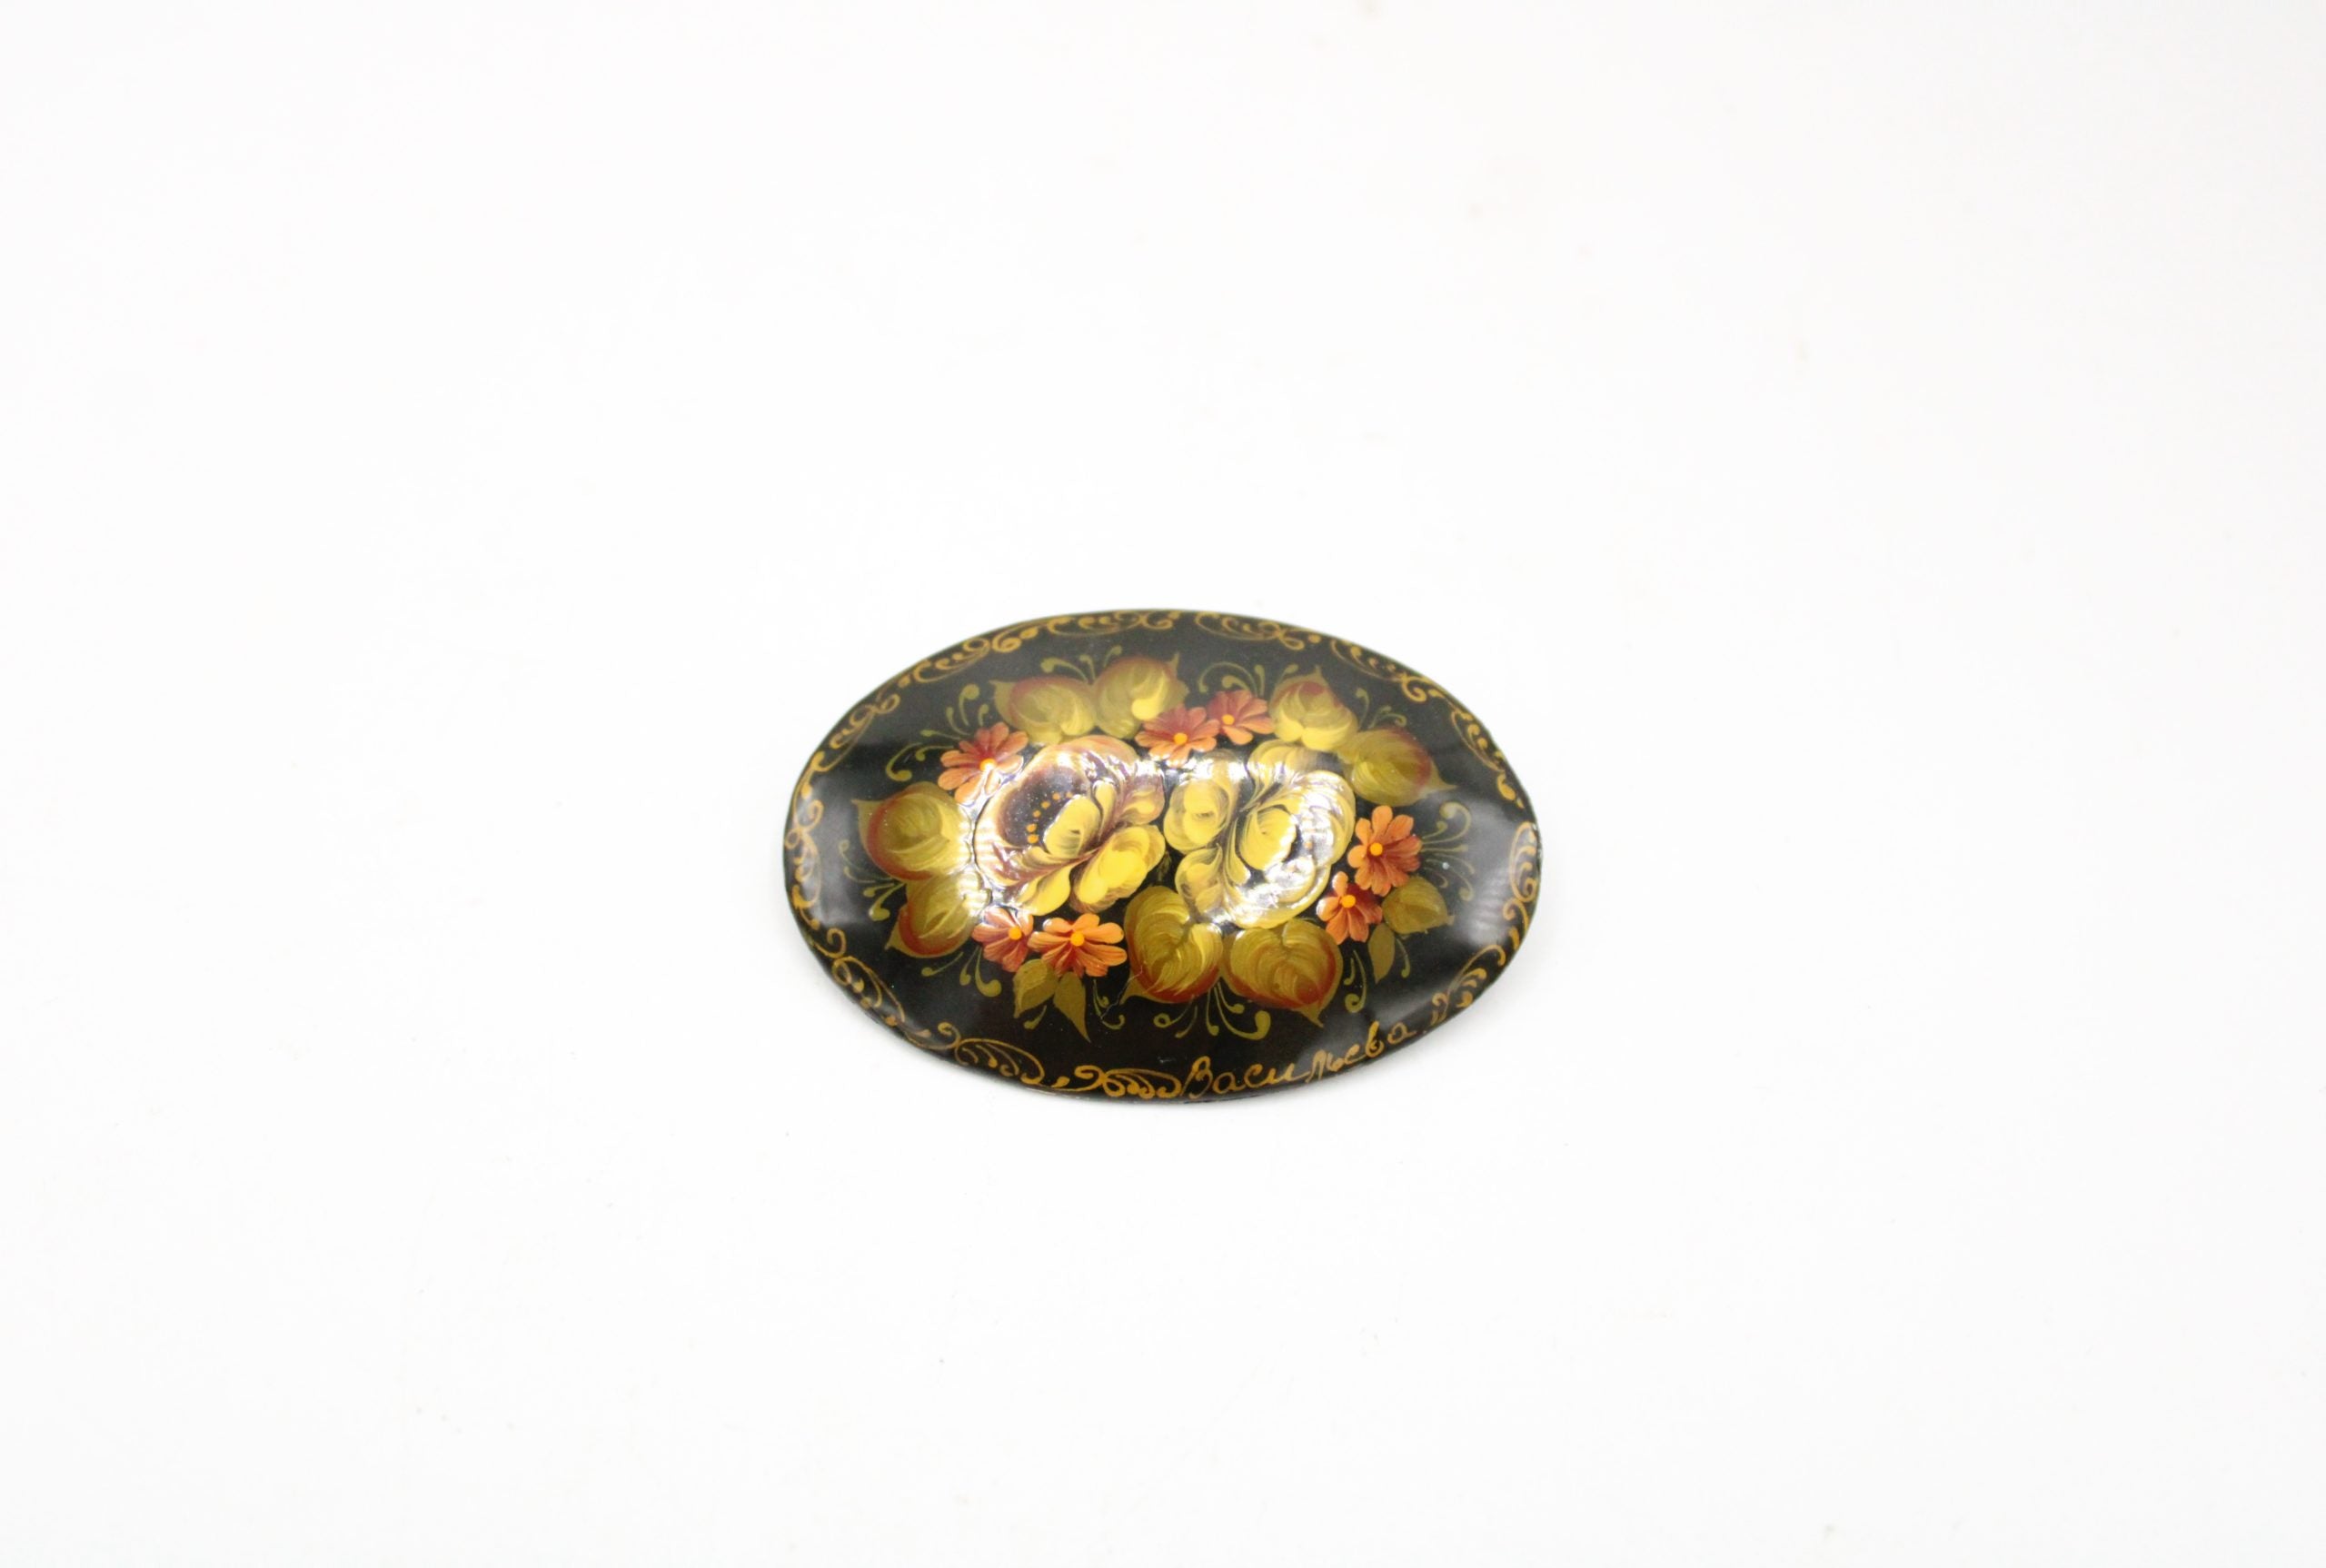 Painted Wooden Pin Handmade In Russia